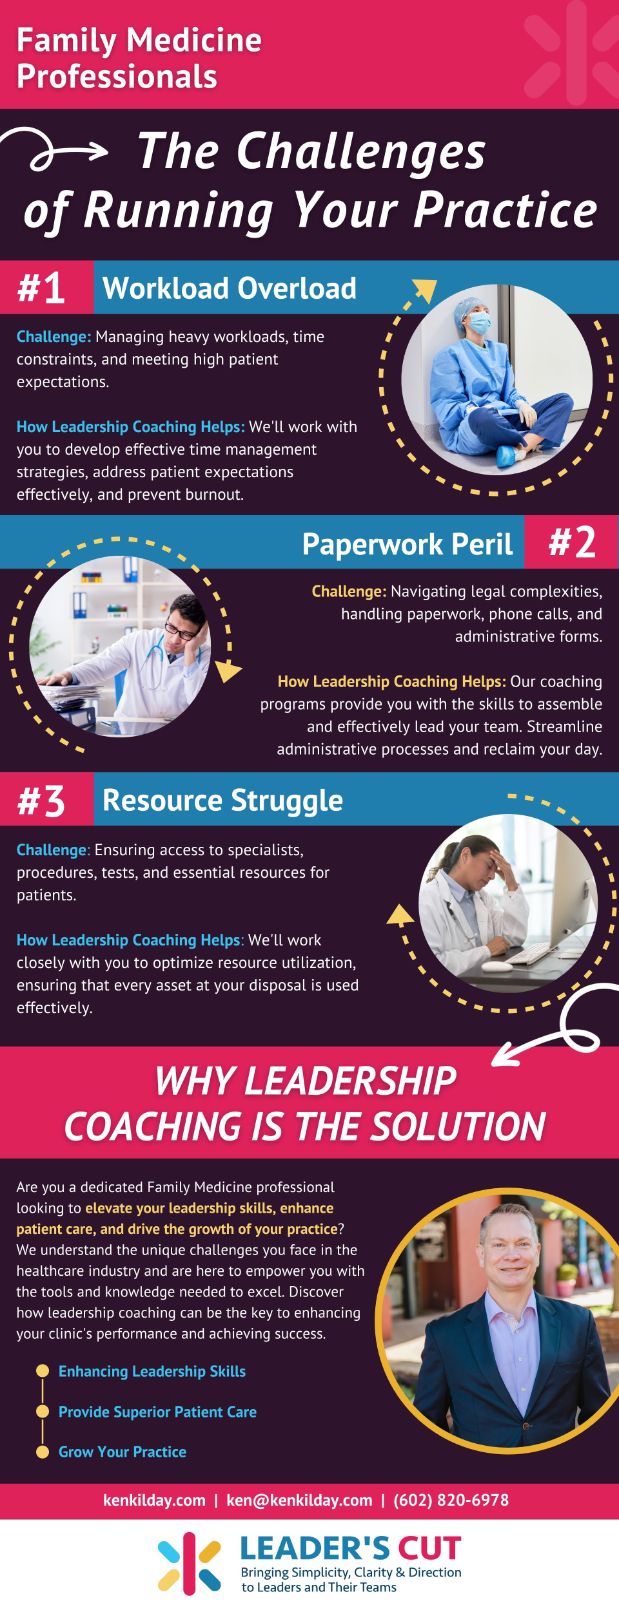 Infographic highlight the issues that dentists commonly face and how leadership coaching can help.